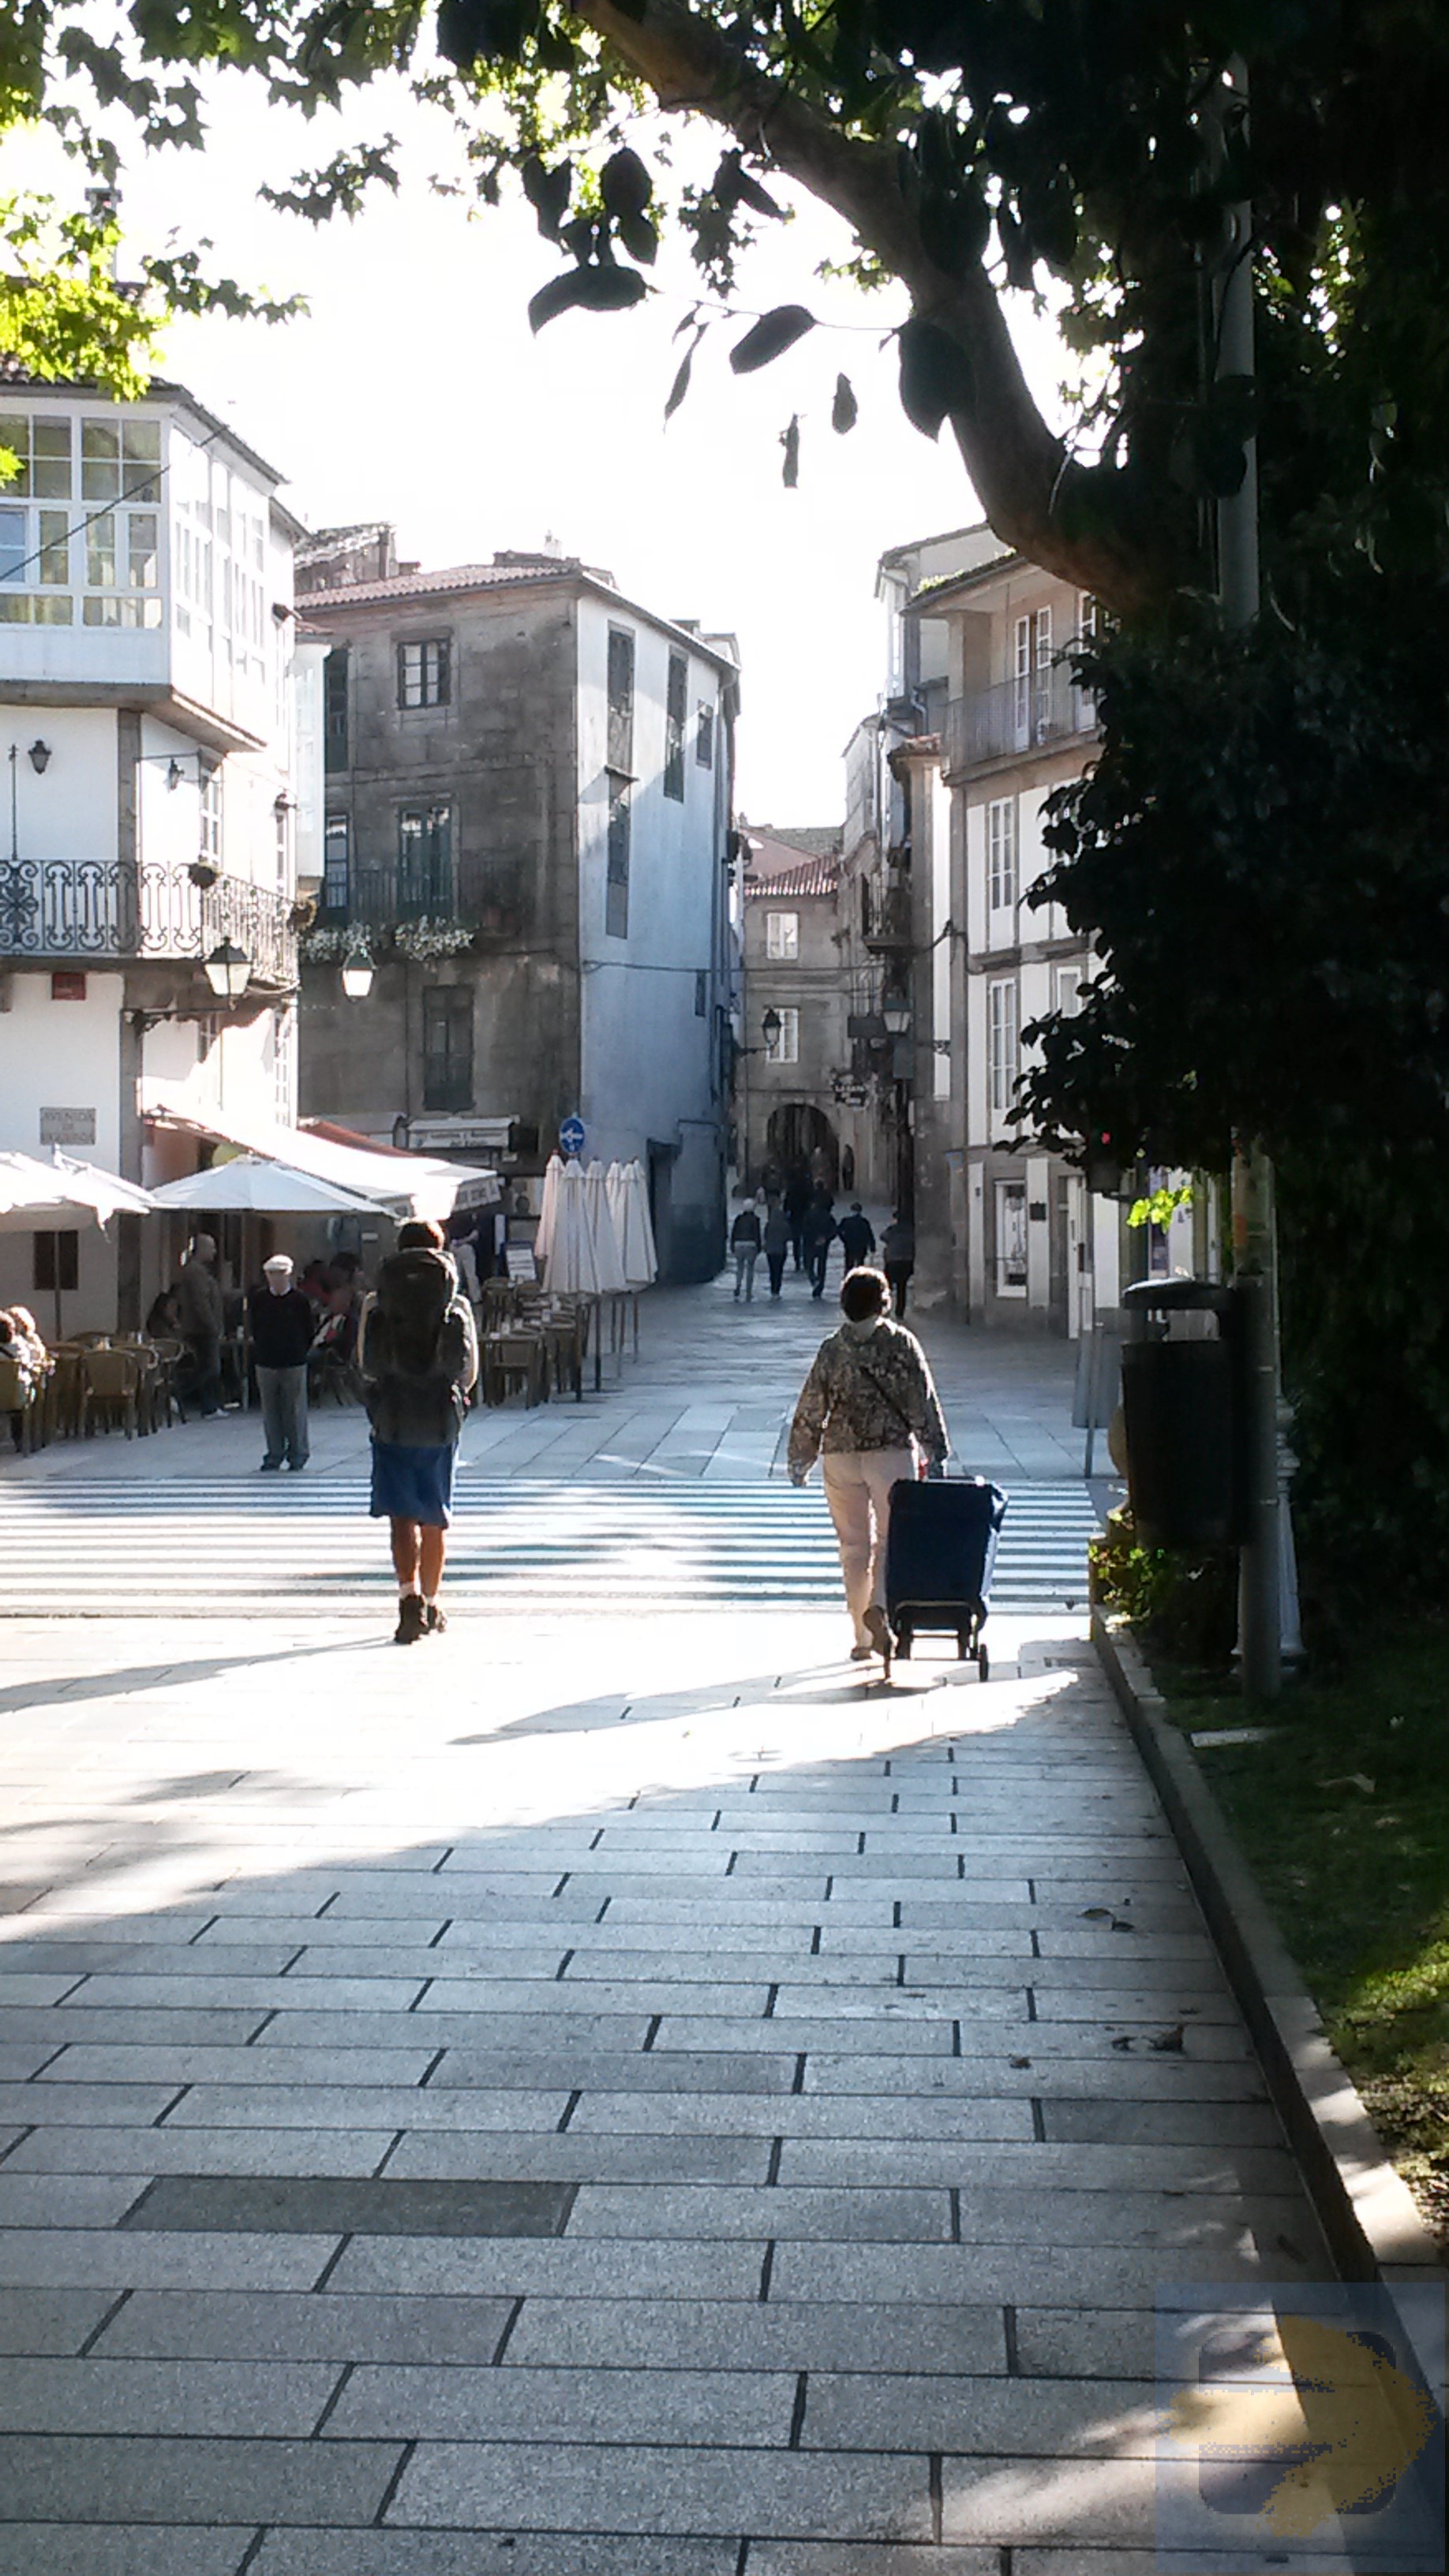 On the Portugues walking into town